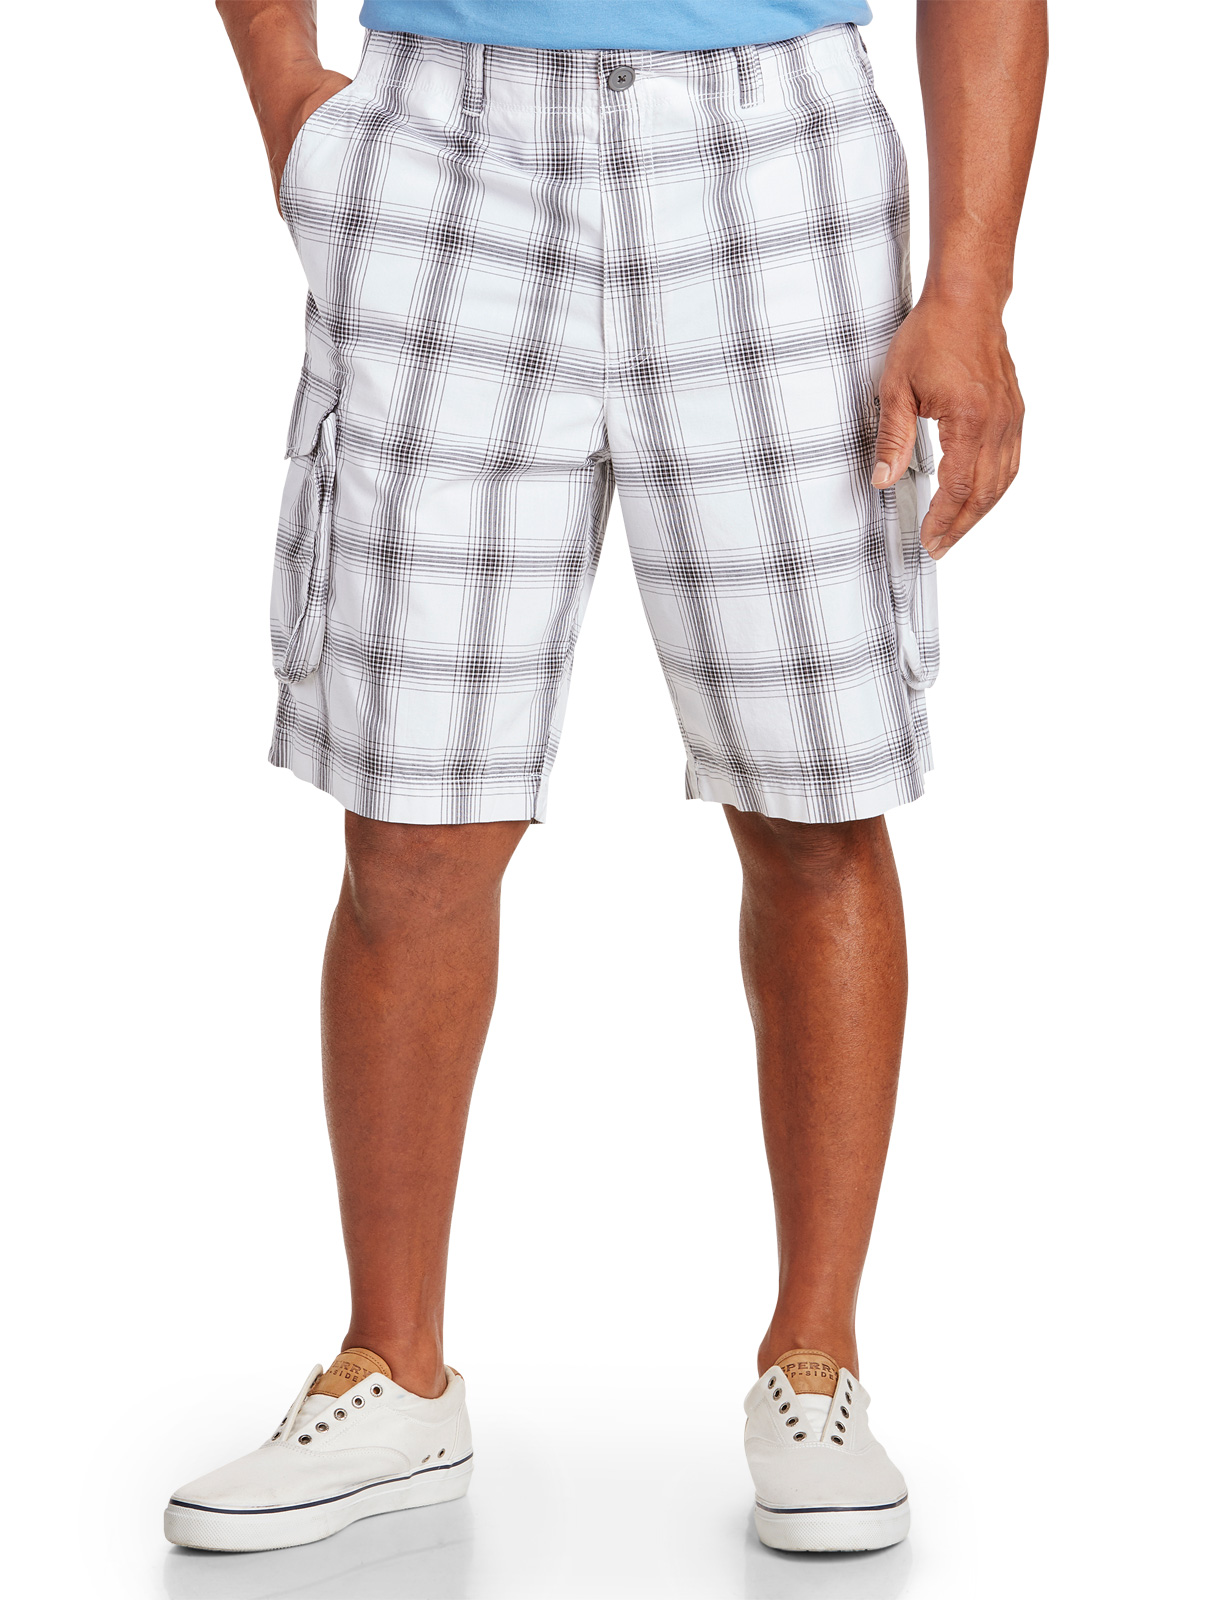 True Nation Men's Big and Tall Plaid Cargo Shorts